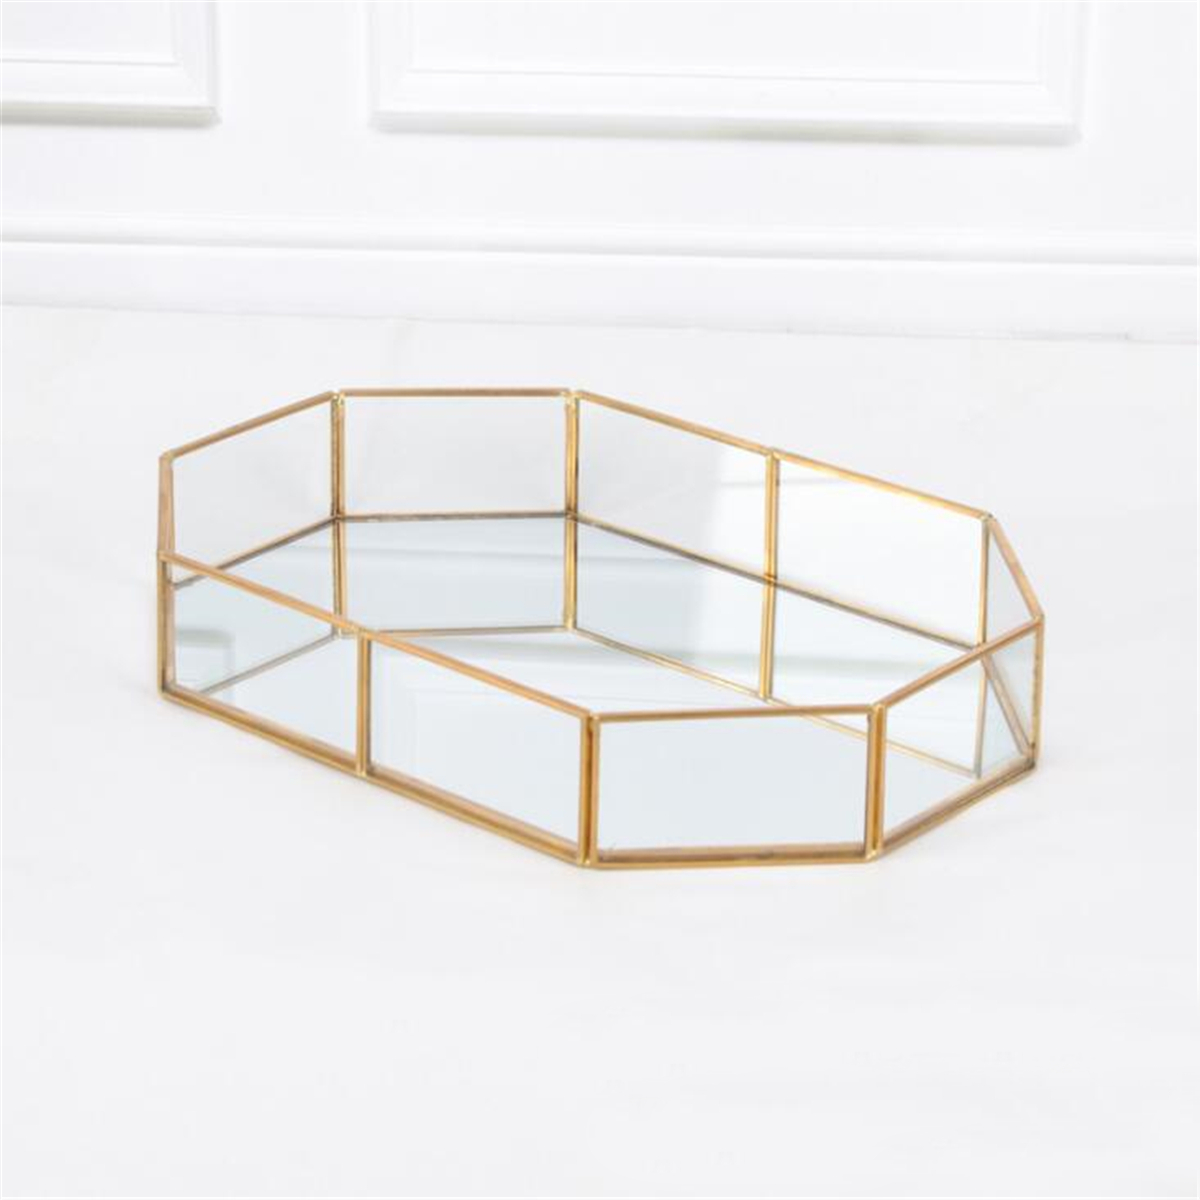 2-Size-Mirror-Glass-Tray-Octagon-Cosmetic-Makeup-Desktop-Organizer-Jewelry-Display-Stand-Holder-1382768-6